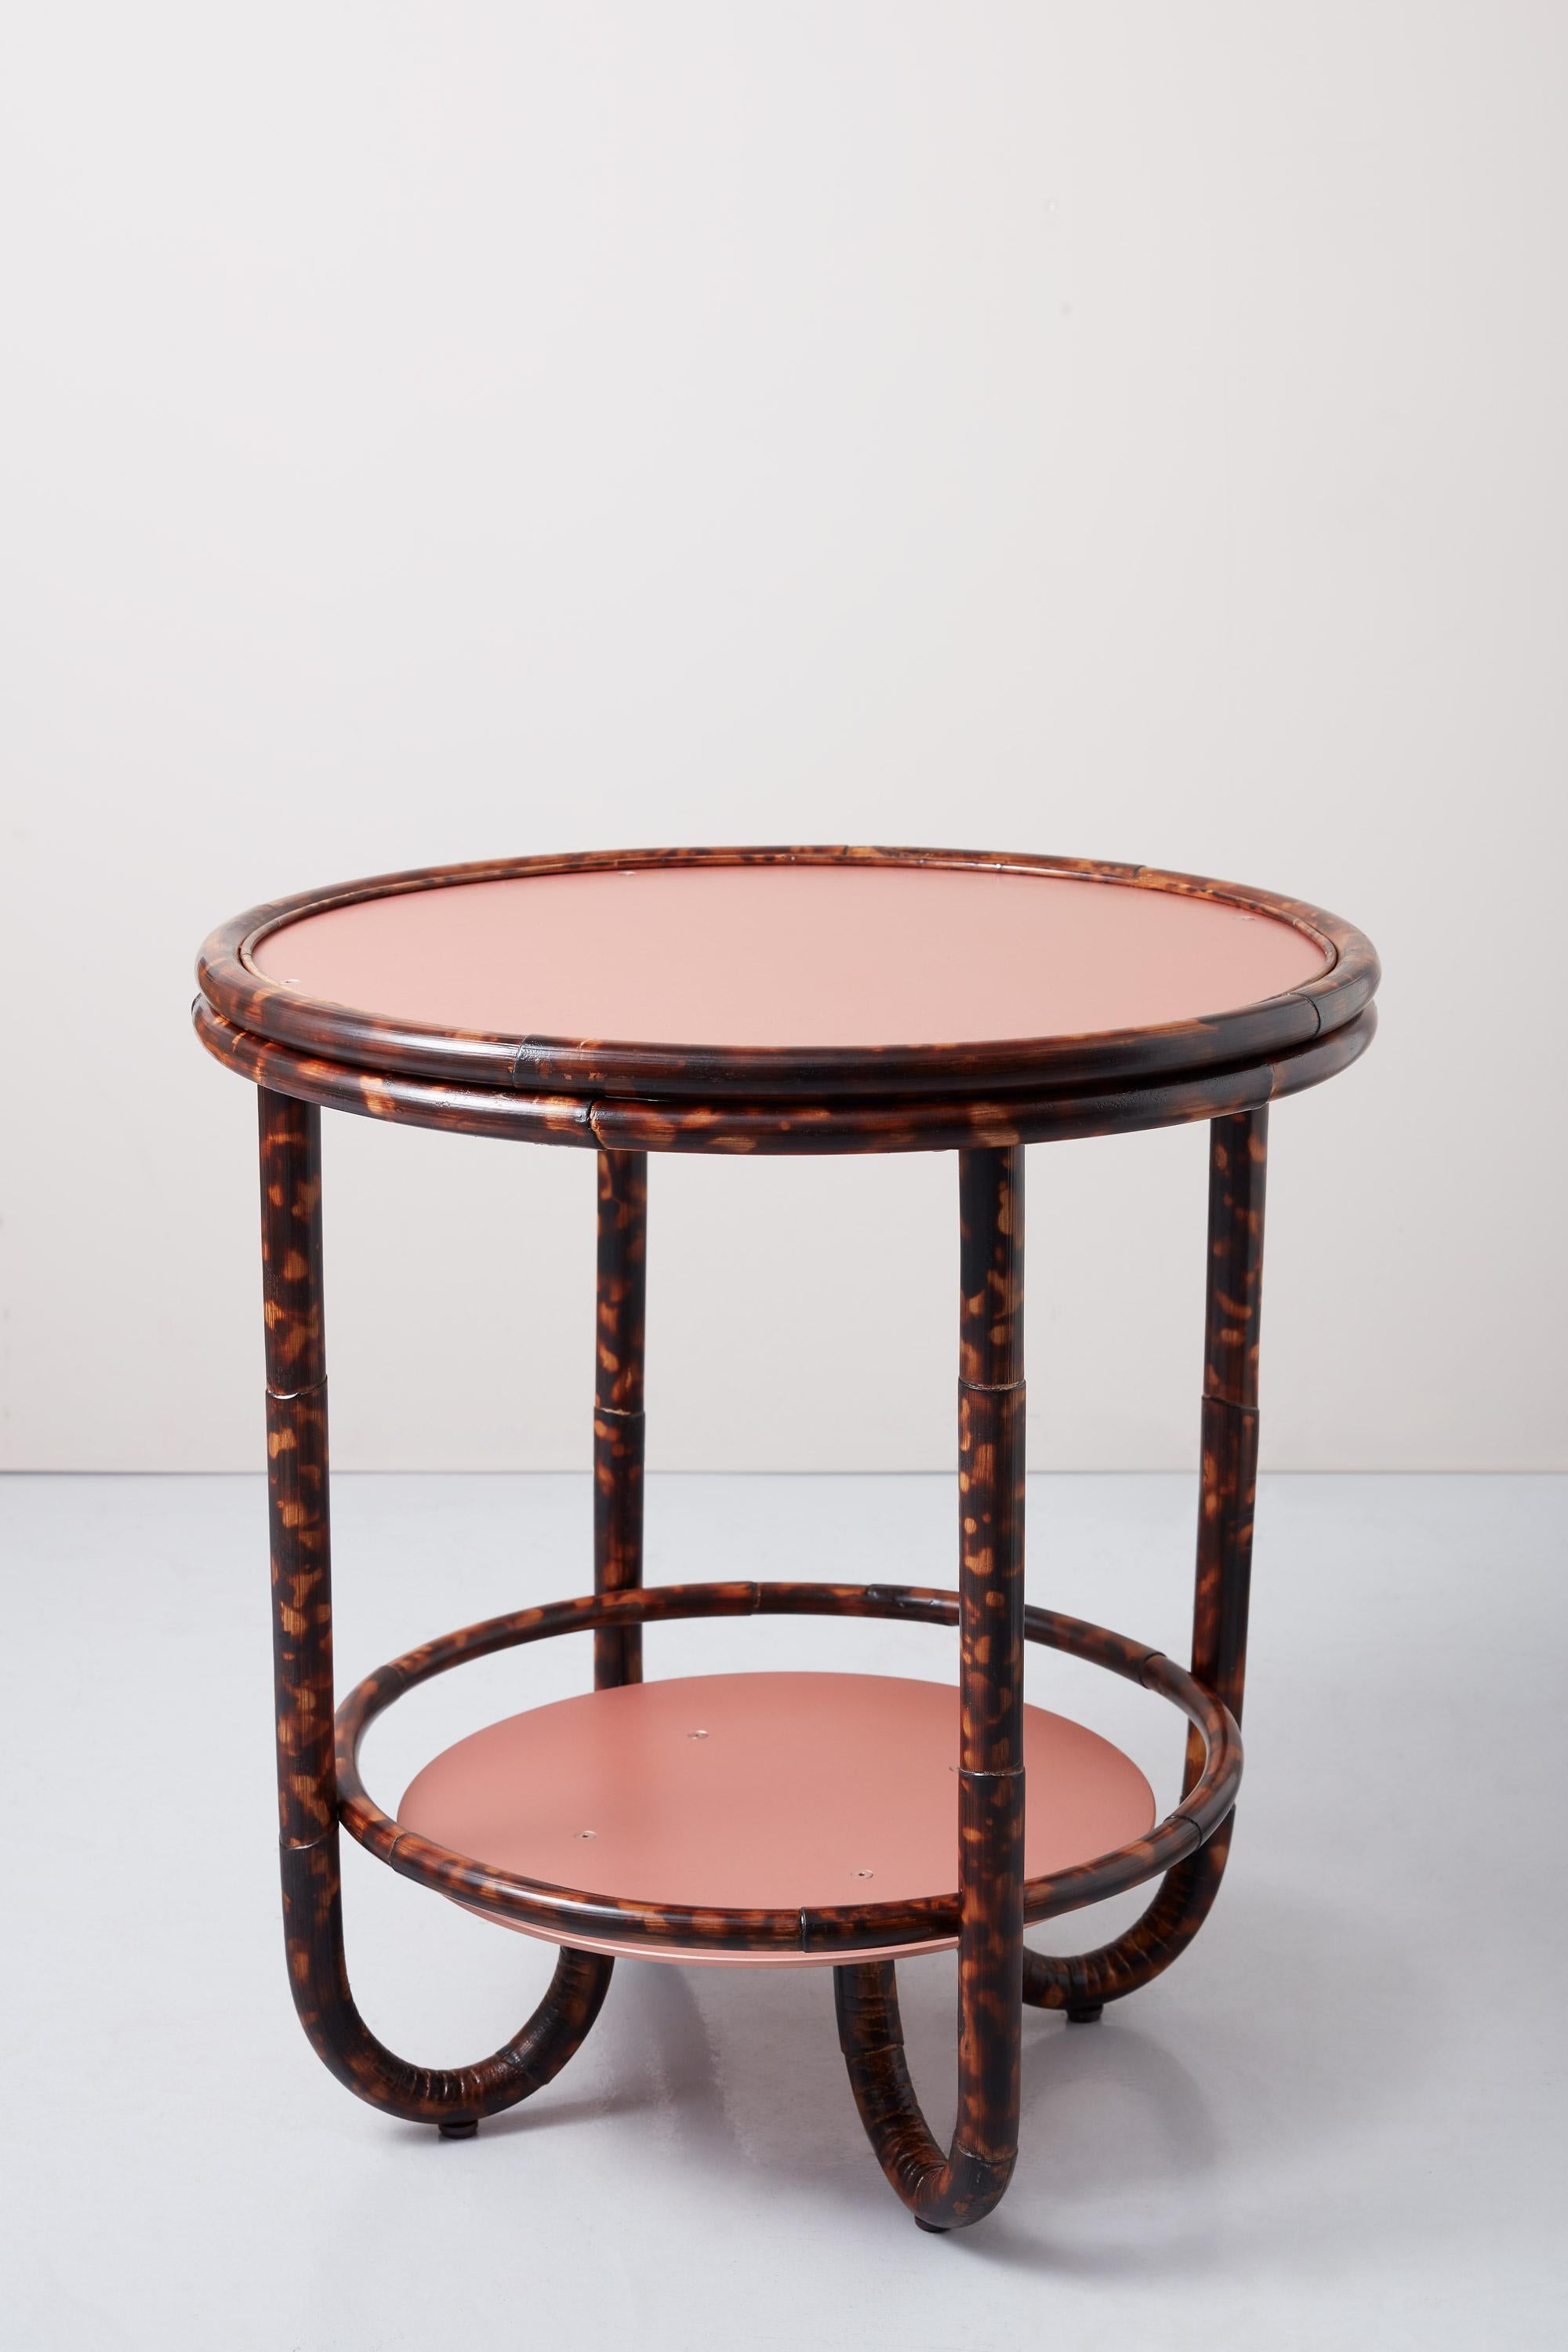 Tortoise Torched Rattan and Salmon-Colored Anodised Aluminium Cocktail Table In New Condition For Sale In London, GB